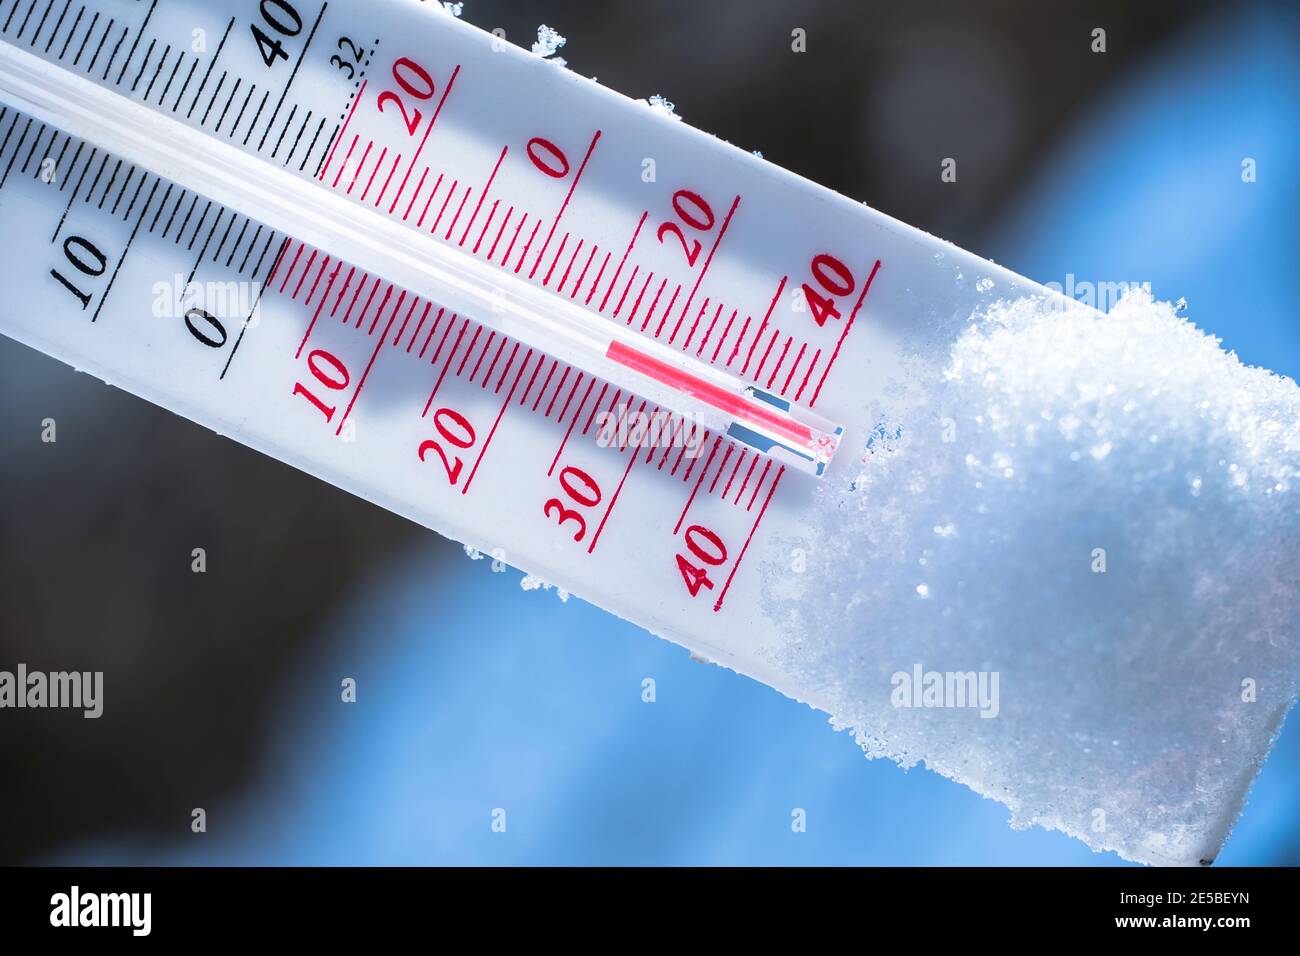 Outdoor Thermometer Wall House Shows Very Low Temperature Degrees Celsius  Stock Photo by ©Iri_sha 242822634